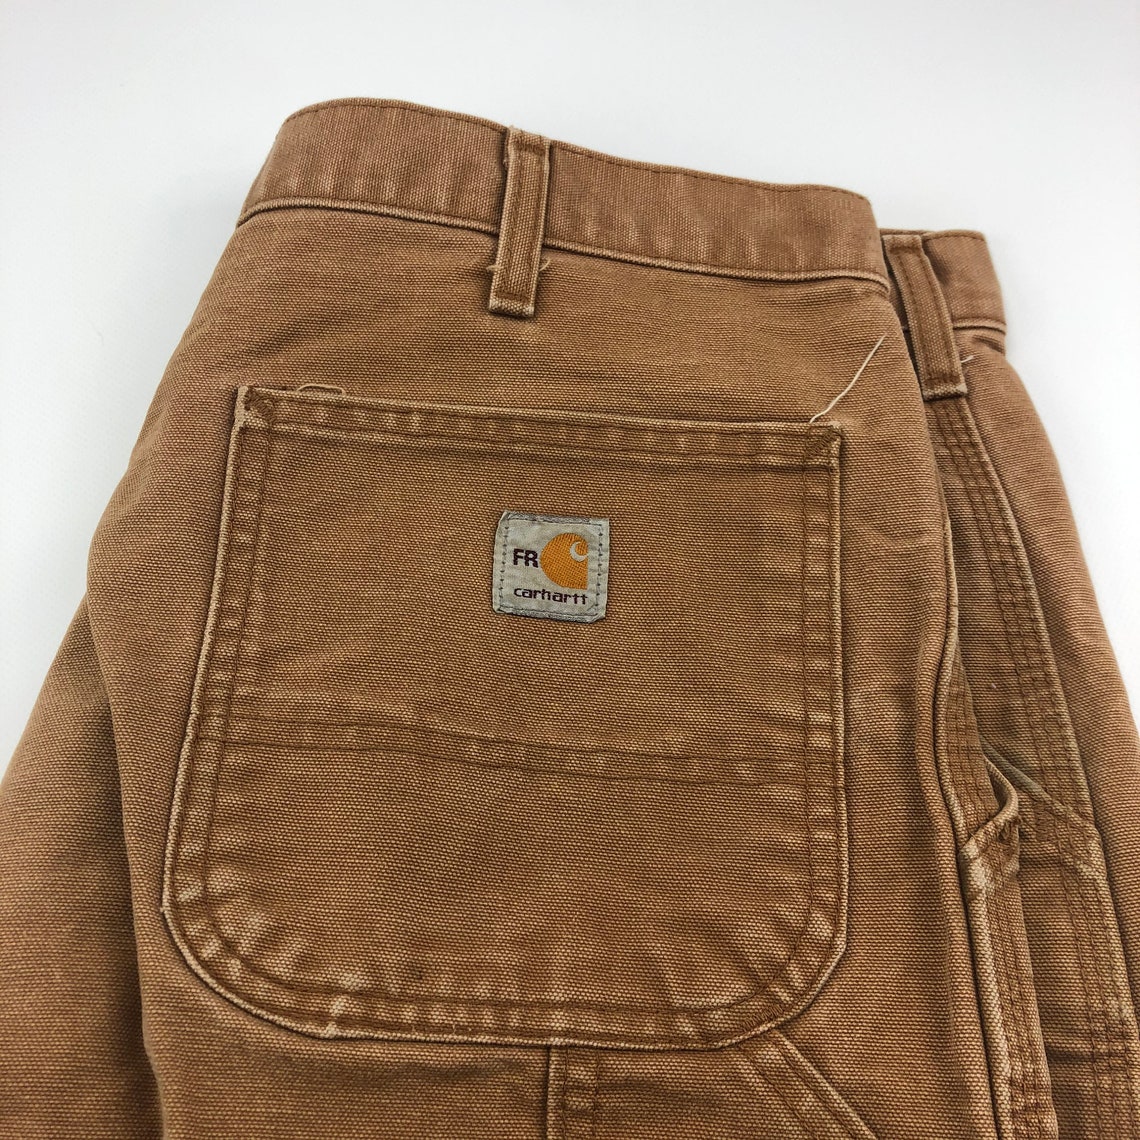 Vintage Carhartt FR Faded Brown Carpenter Pants Size 36x30 | Etsy